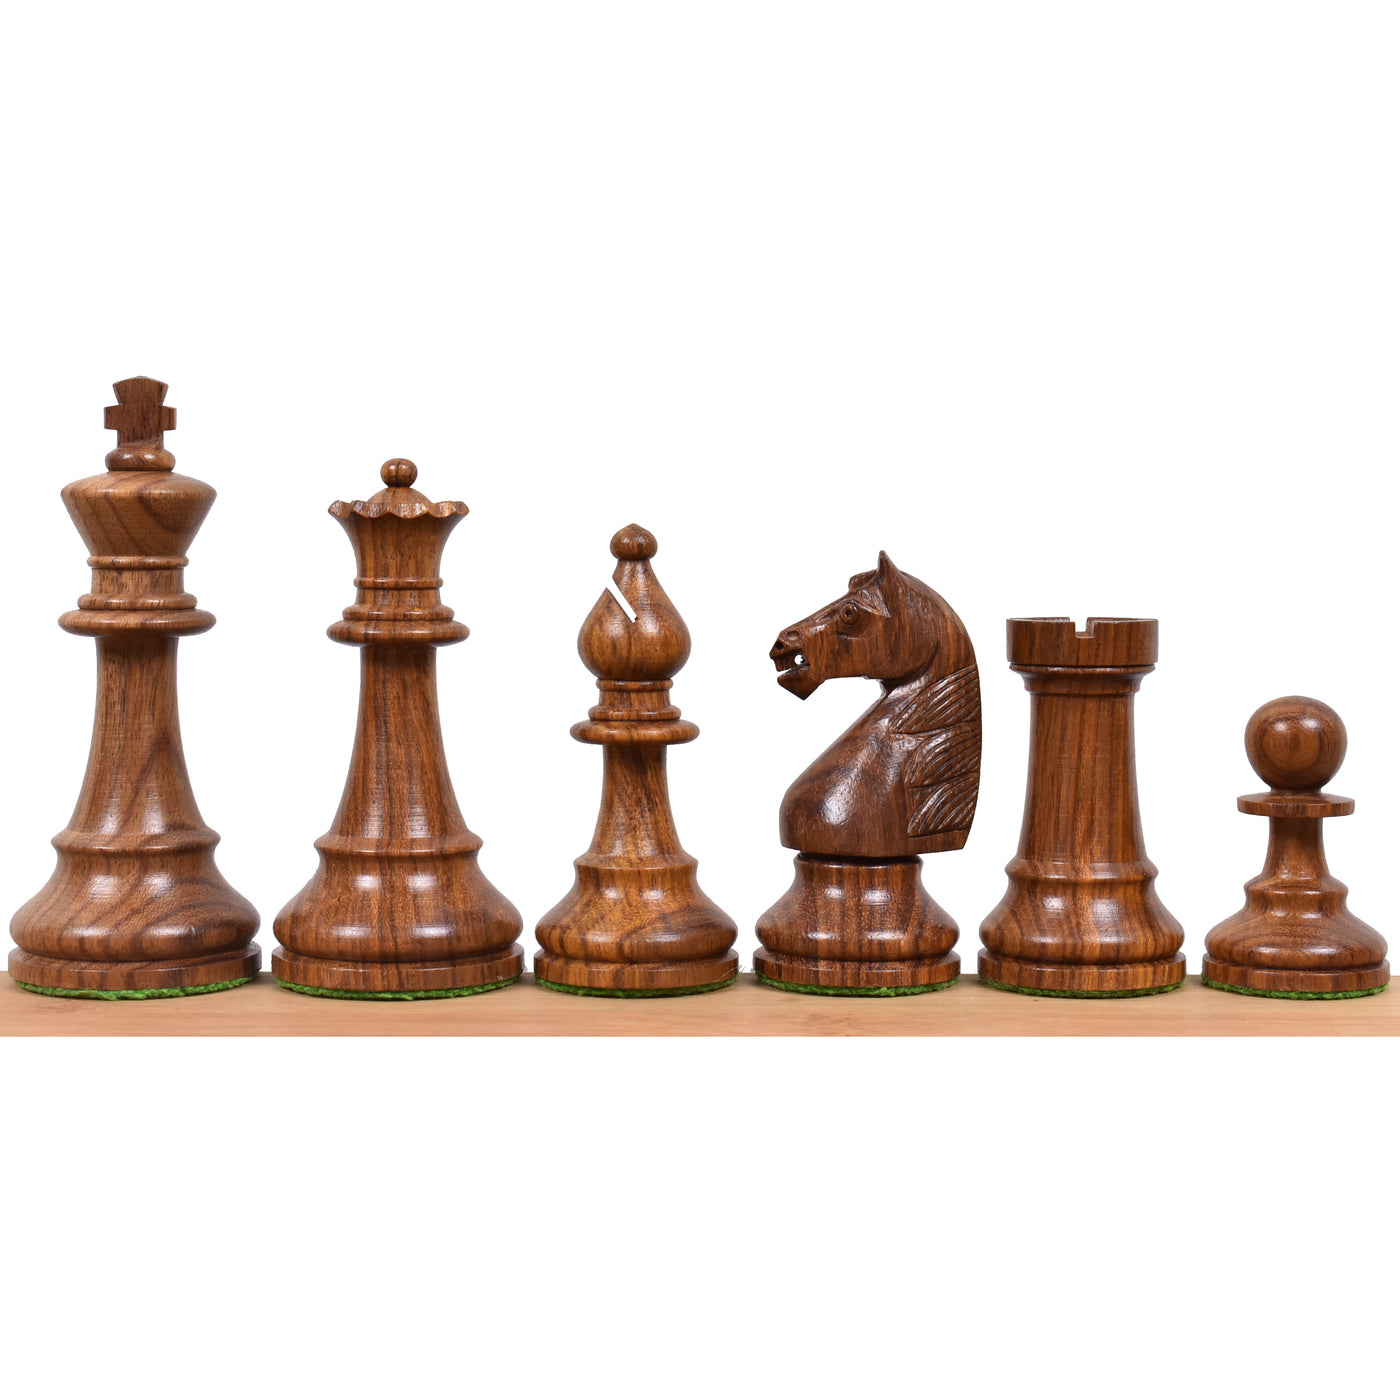 French Grandmaster's Staunton Chess Pieces Only set- Golden Rosewood - 4.1" King